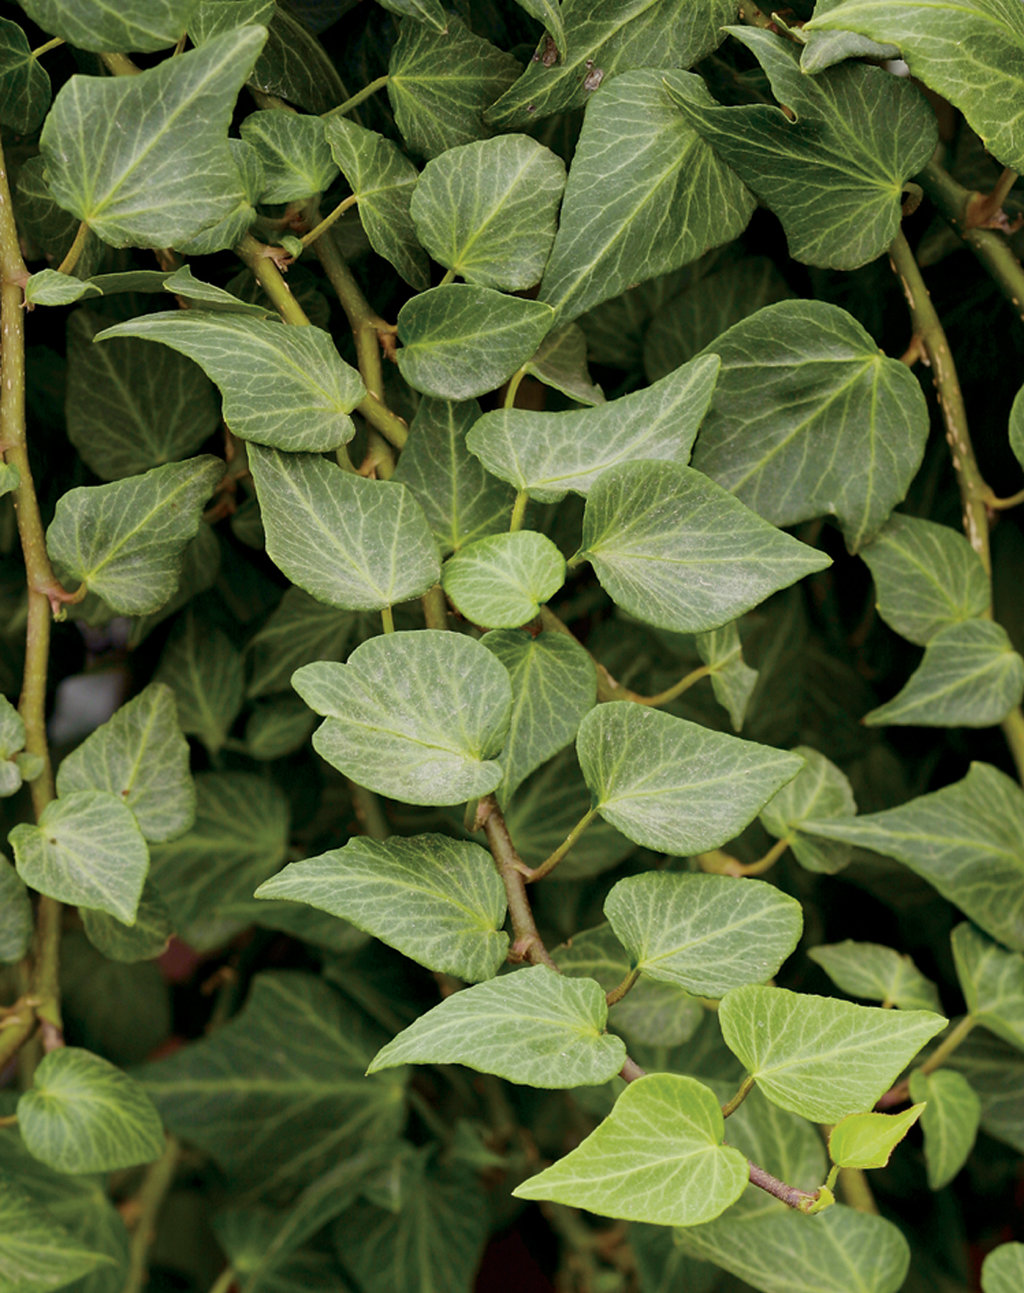 Ivy Flower, Hedera helix, English Ivy